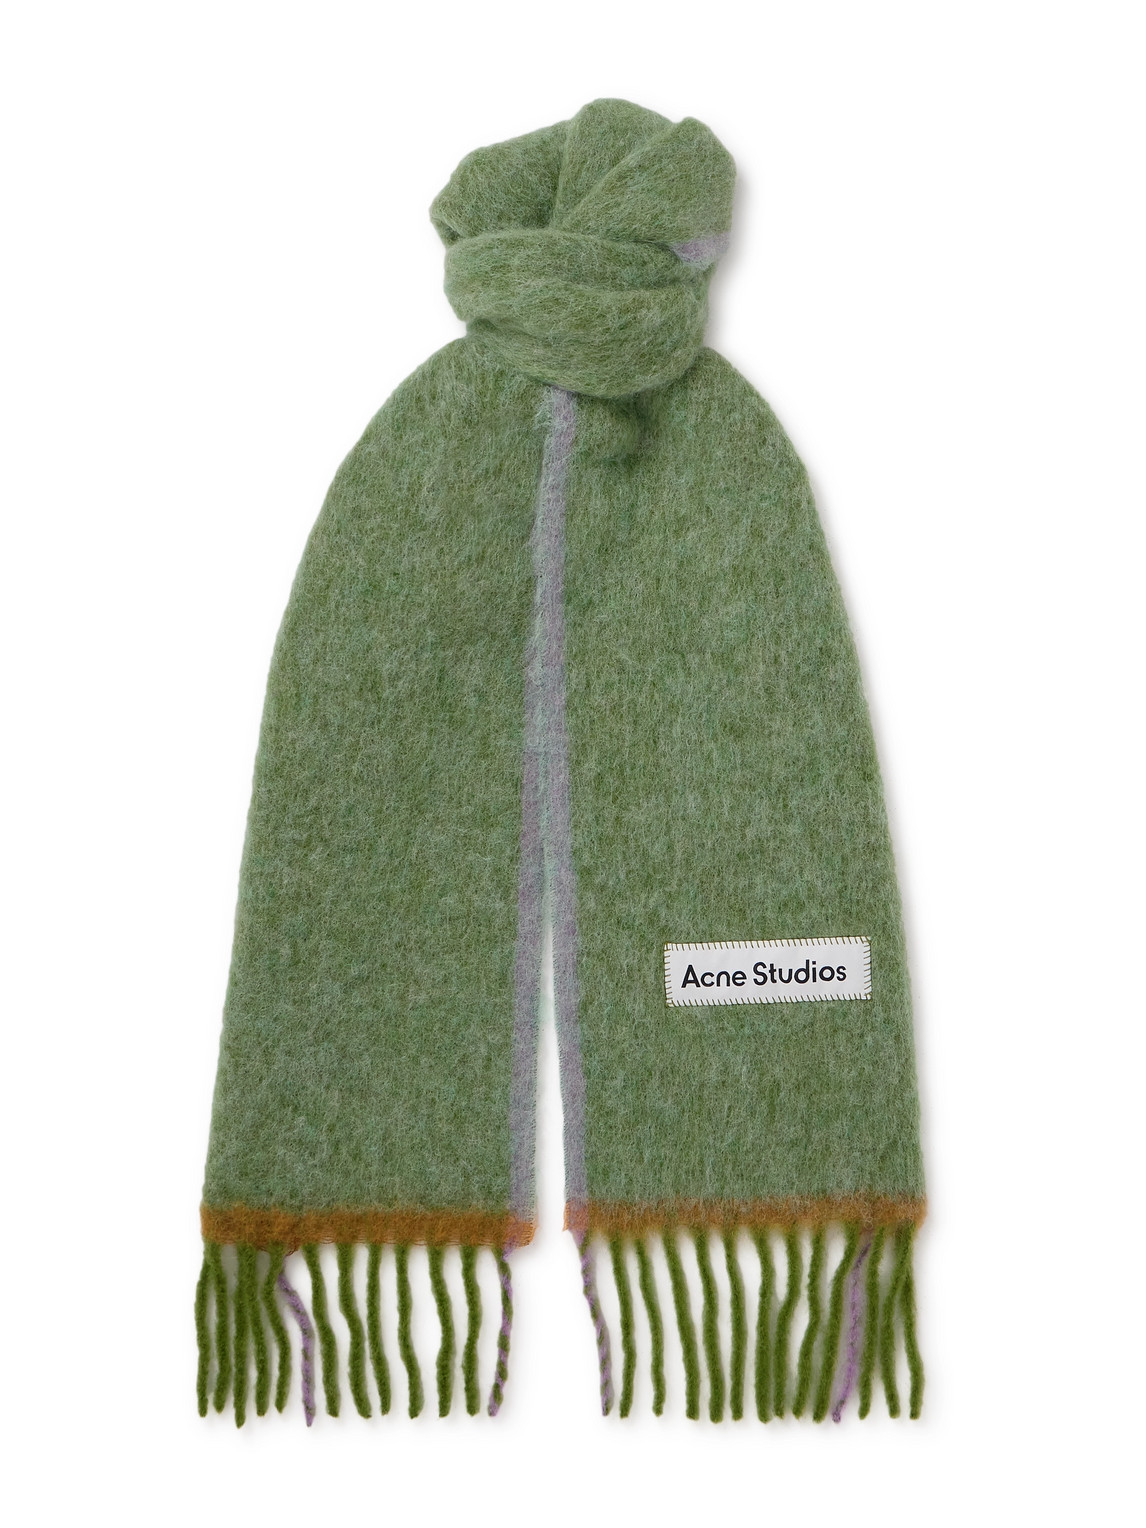 ACNE STUDIOS VALLY FRINGED KNITTED SCARF